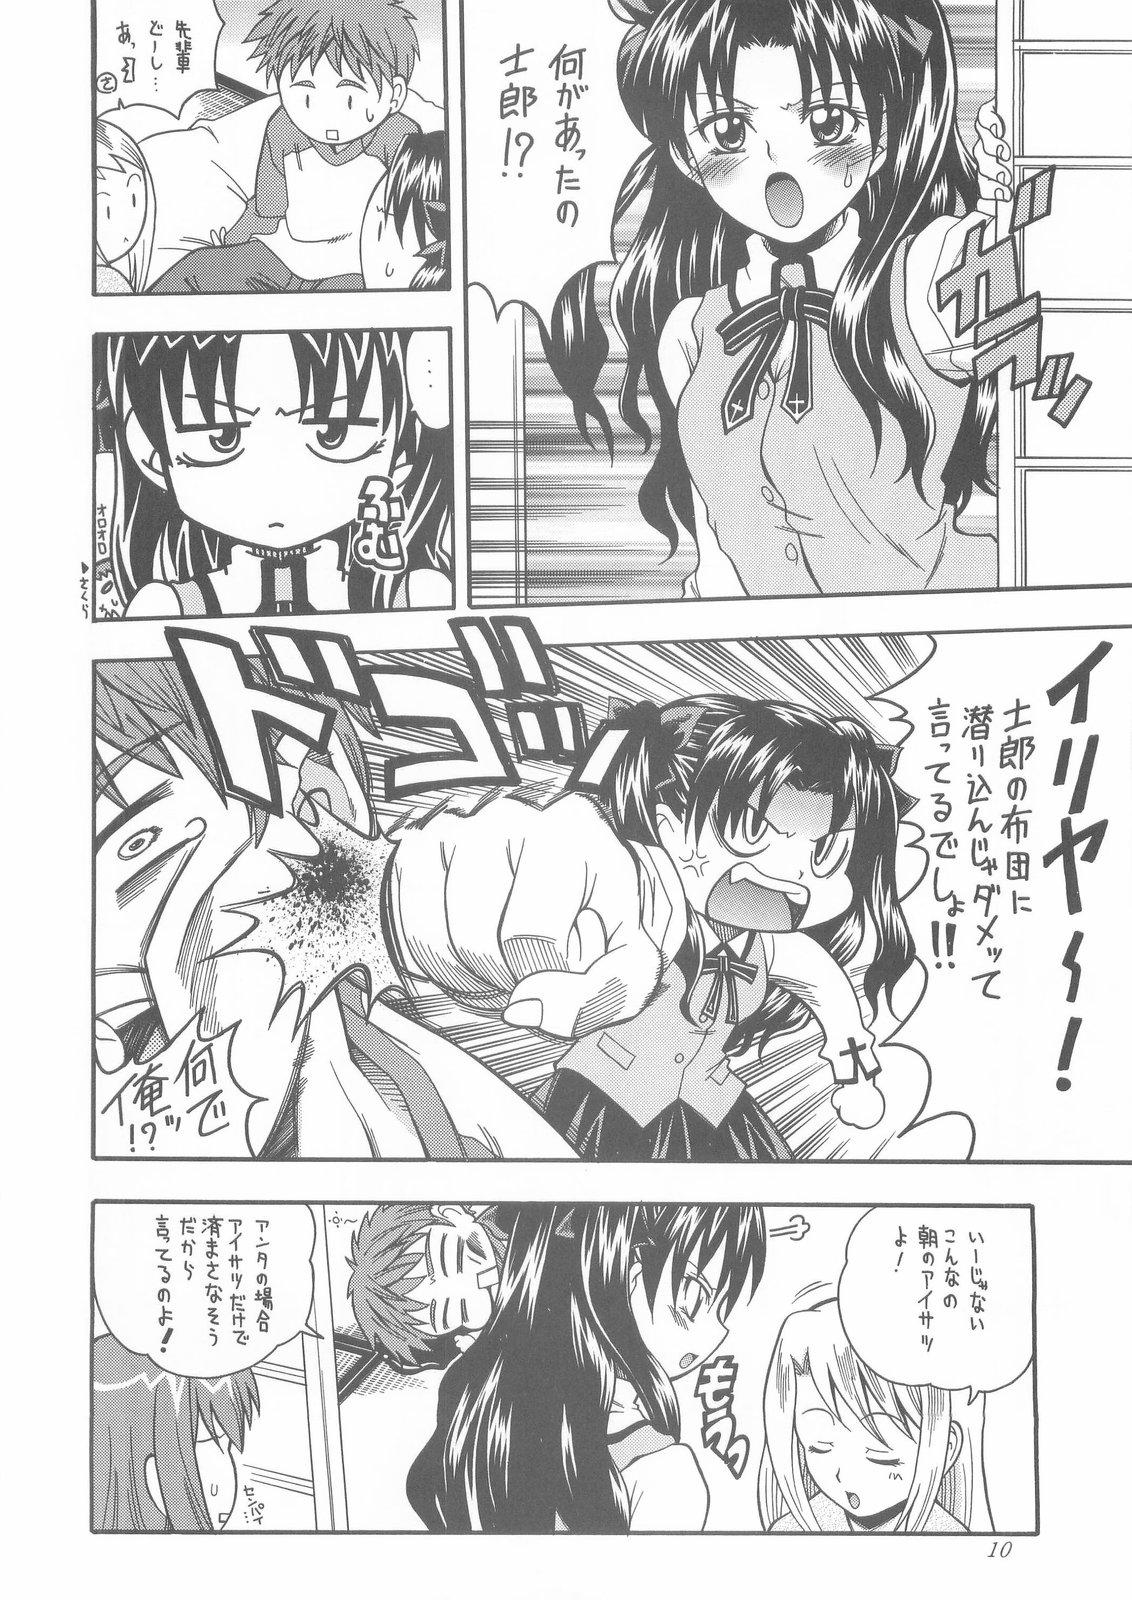 Nasty MONOCHROME - Fate stay night Lesbo - Page 10